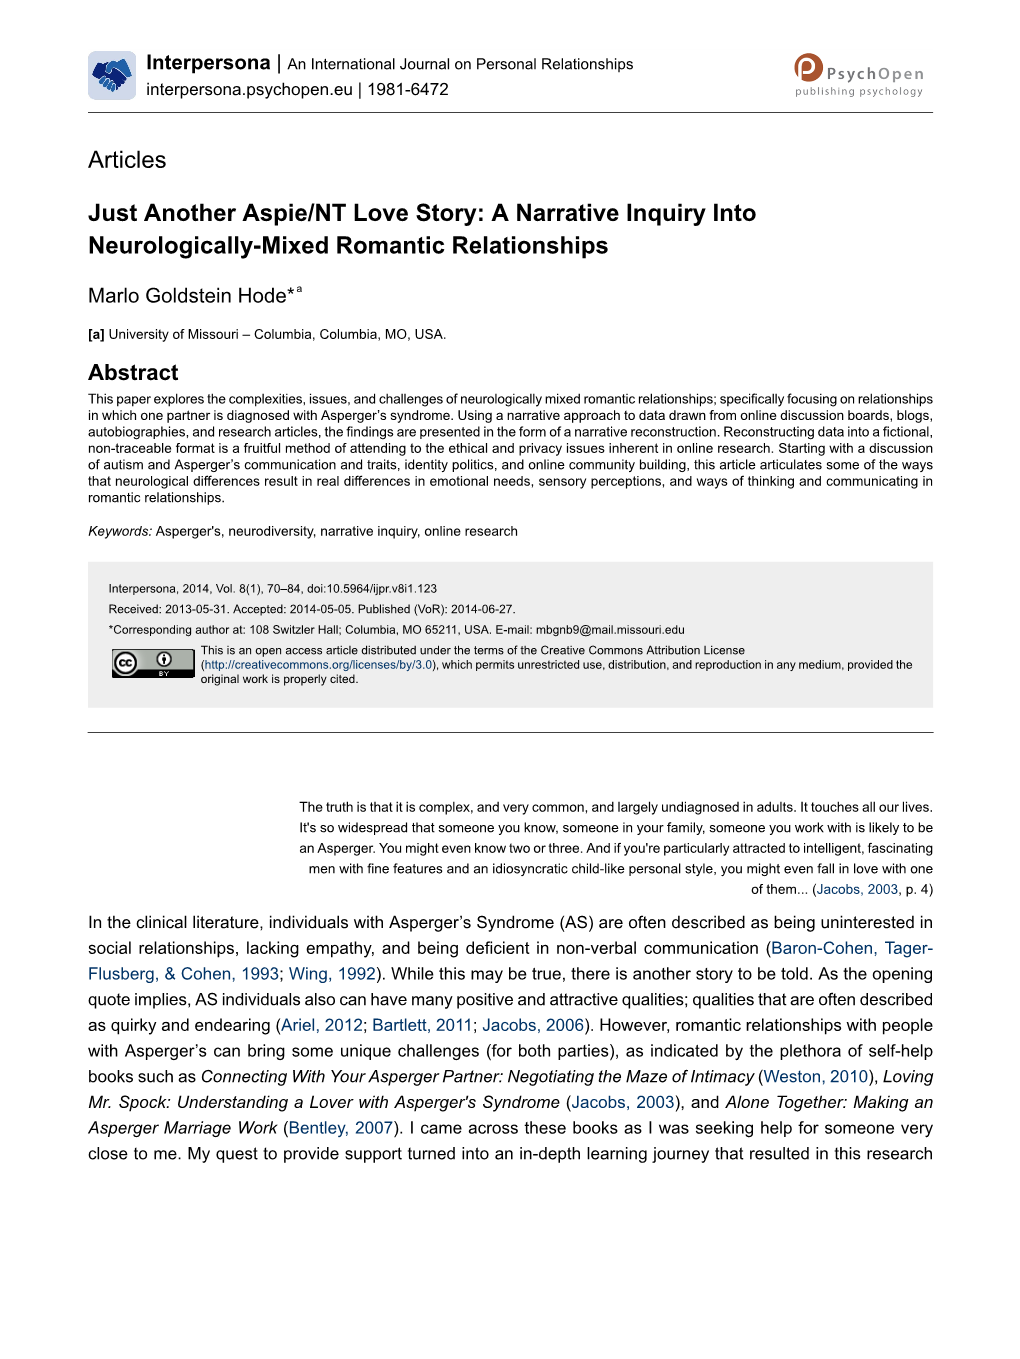 Just Another Aspie/NT Love Story: a Narrative Inquiry Into Neurologically-Mixed Romantic Relationships